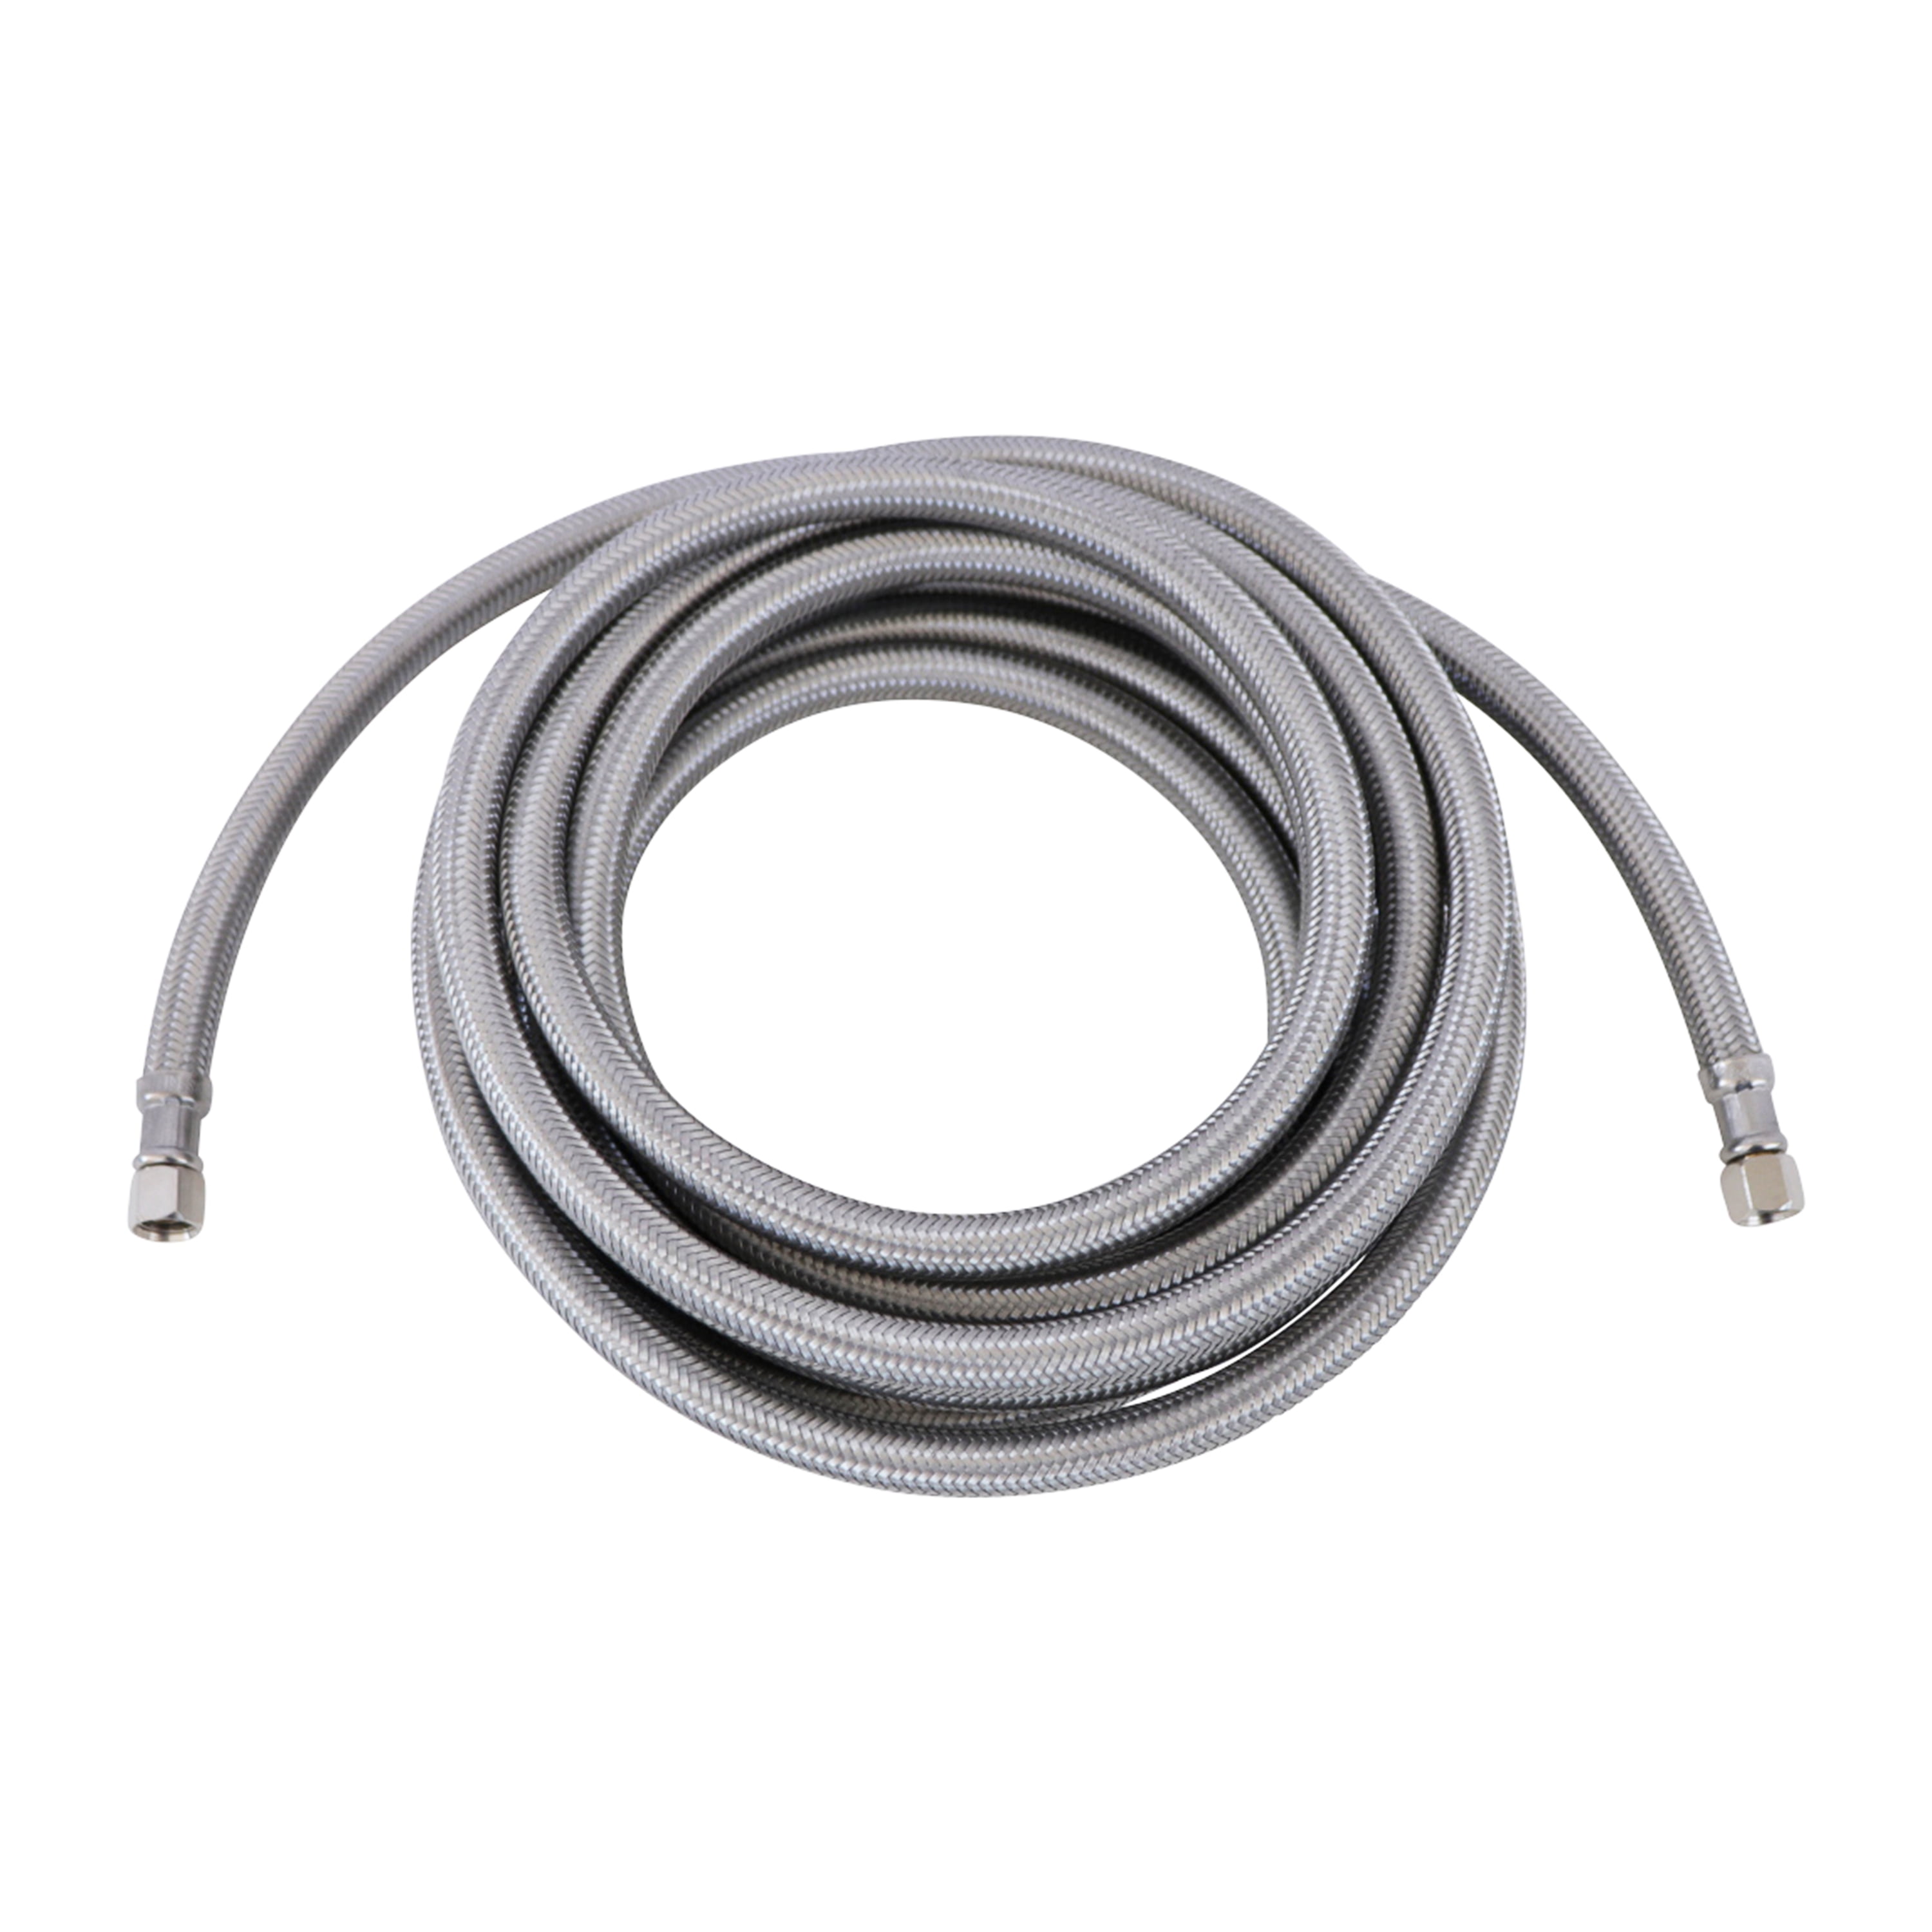 Endurance Pro 15 Foot Universal Ice Maker Flexible Braided Stainless Steel  Water Supply Hose Connector Connection, 1/4 x 1/4 Inch Compression Fittings  